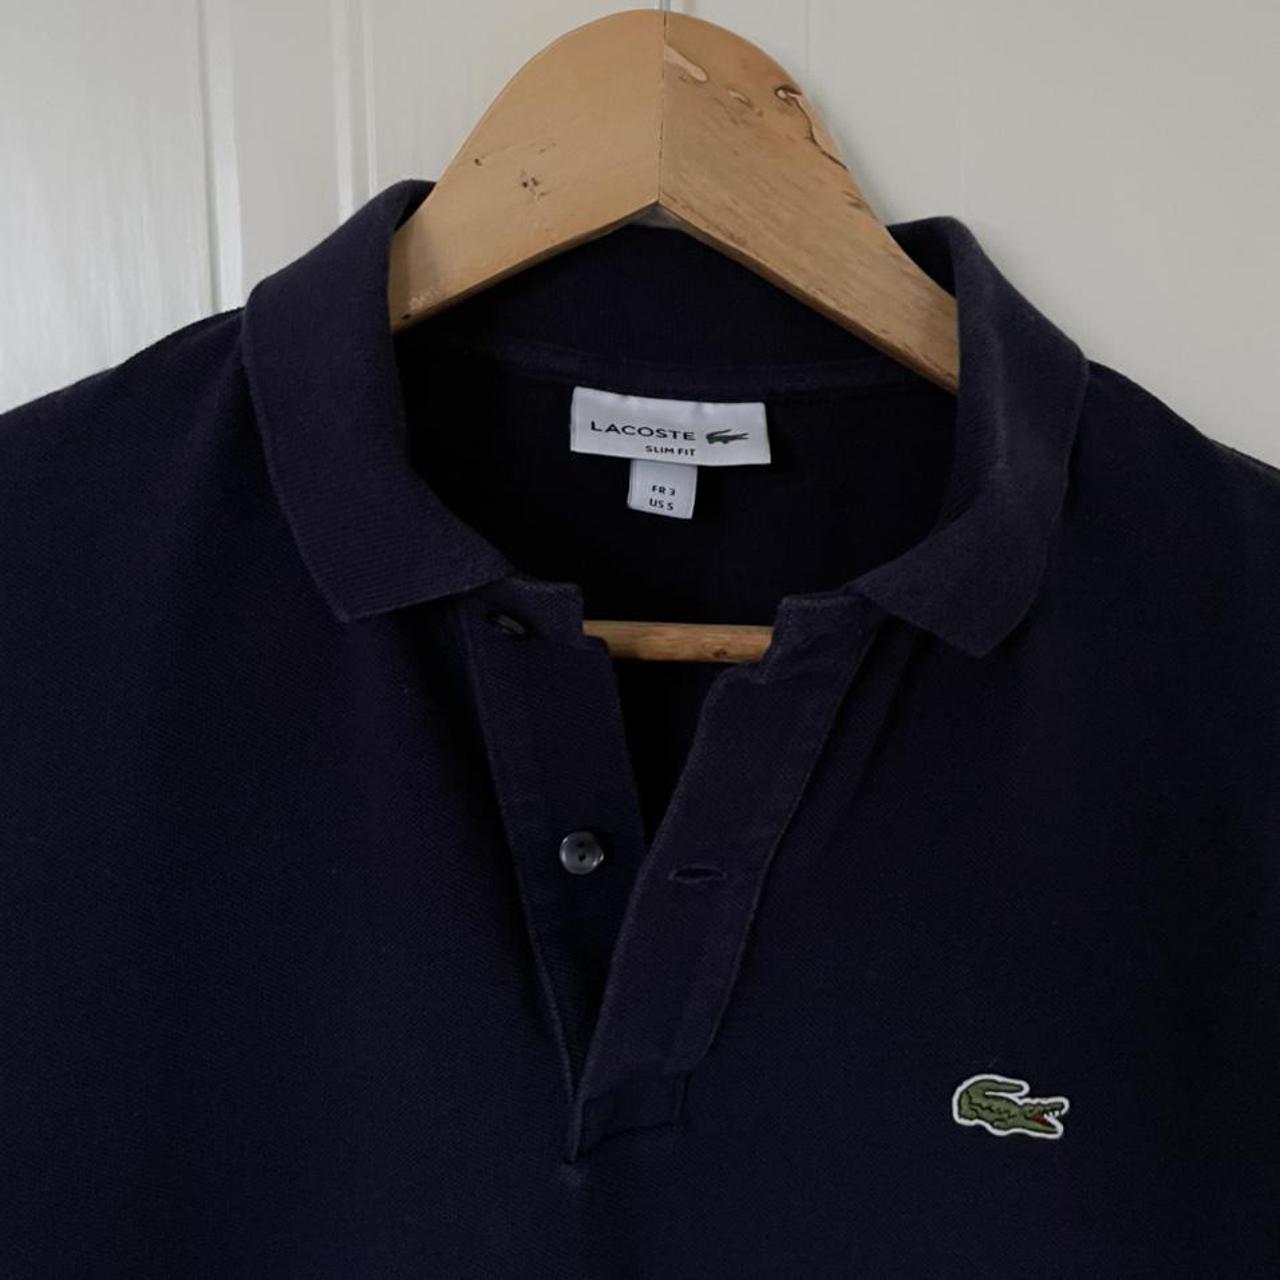 Lacoste slim fit polo shirt in navy blue, size 3... - Depop